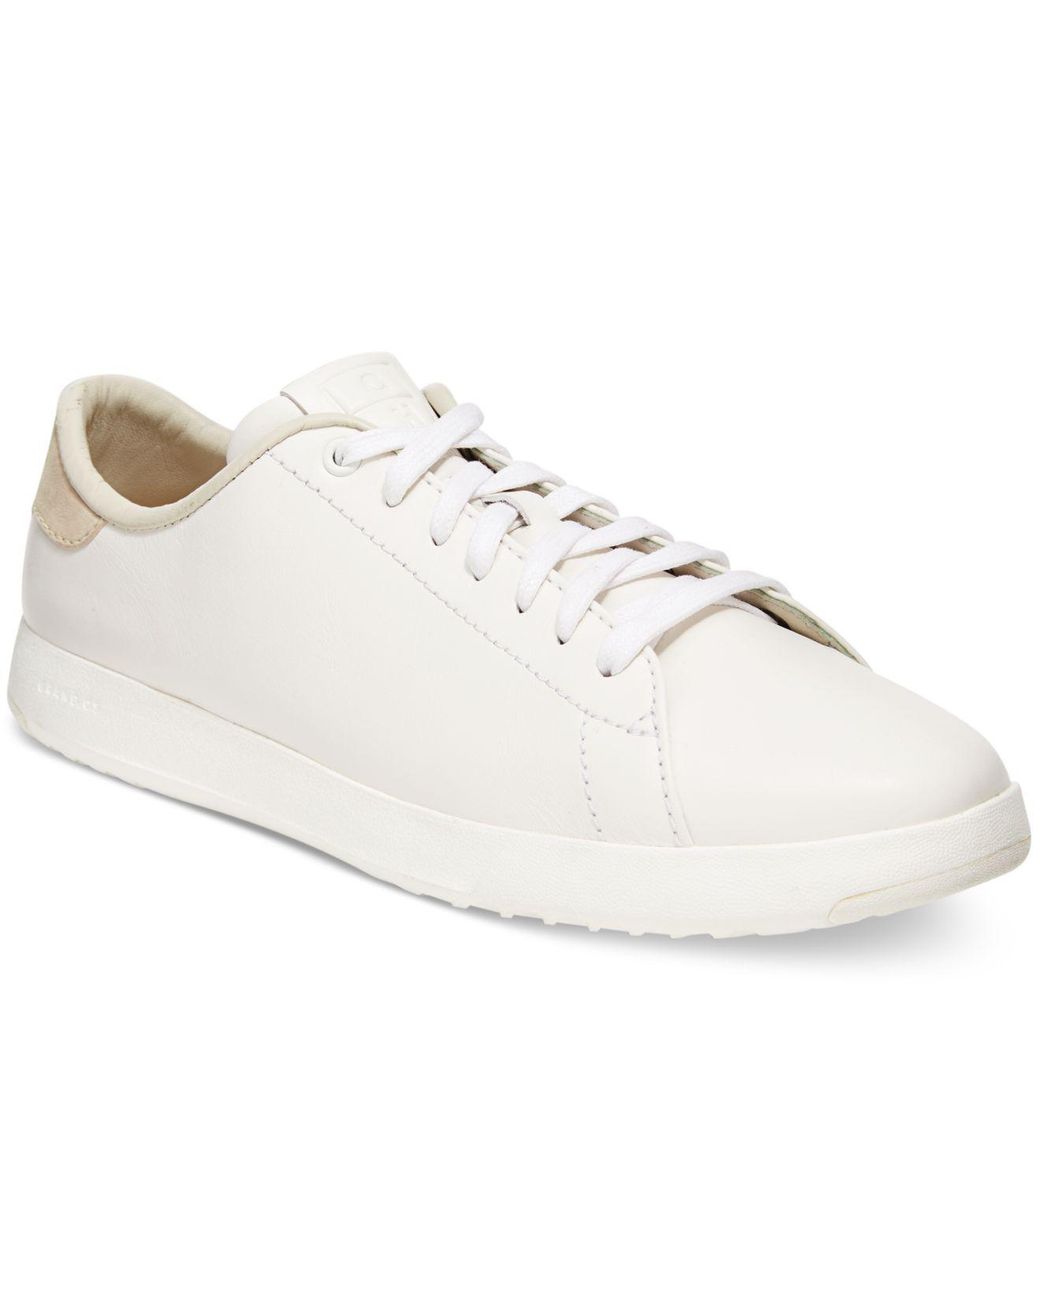 Cole Haan Leather Grand Ro Tennis Lace-up Sneakers in White - Lyst